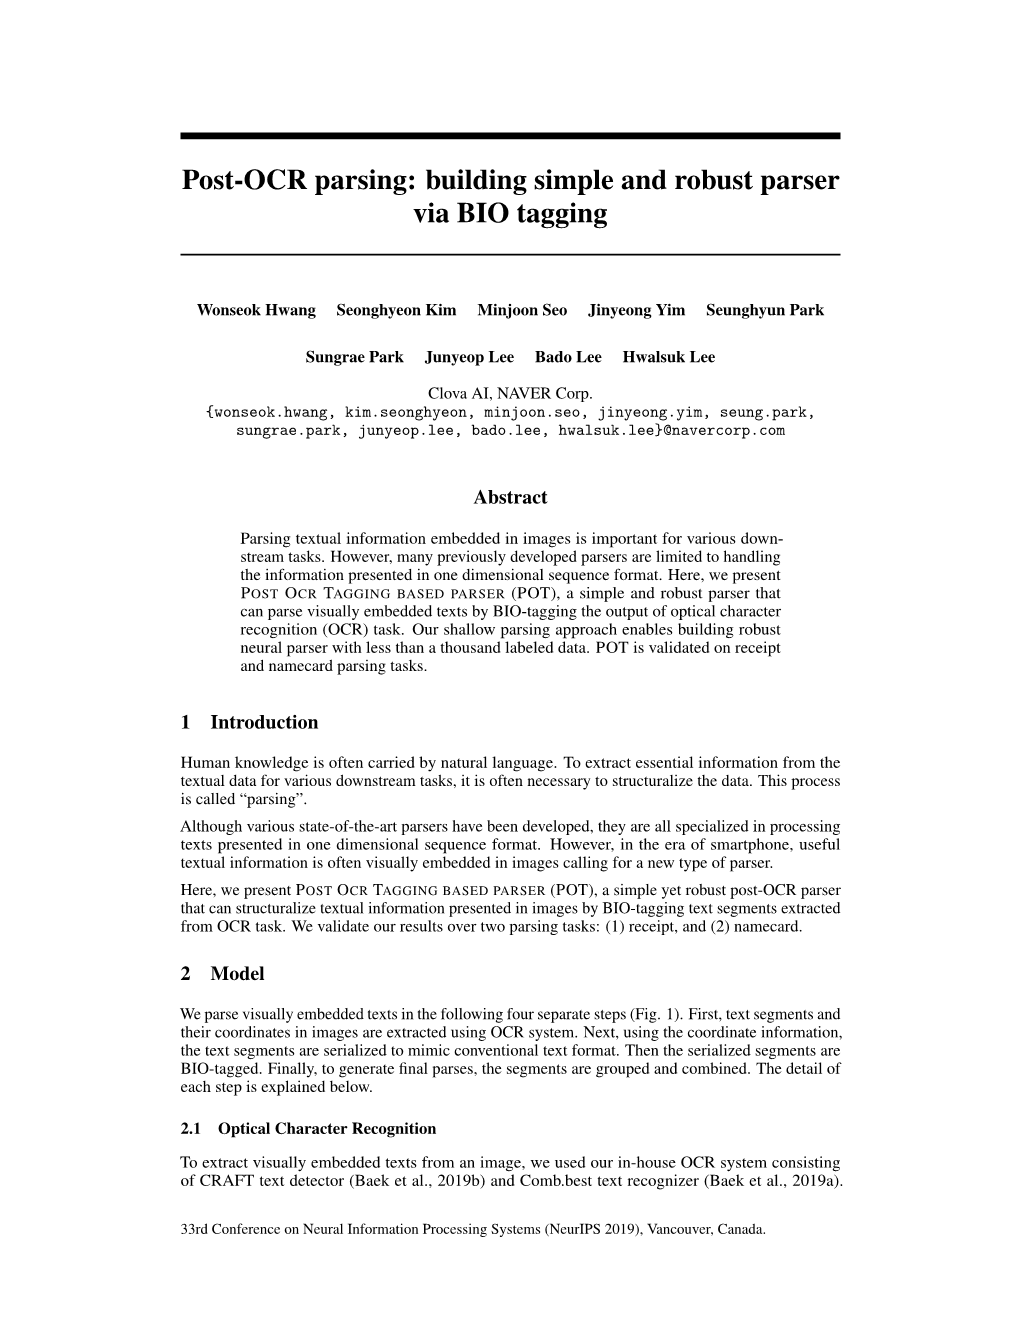 Post-OCR Parsing: Building Simple and Robust Parser Via BIO Tagging